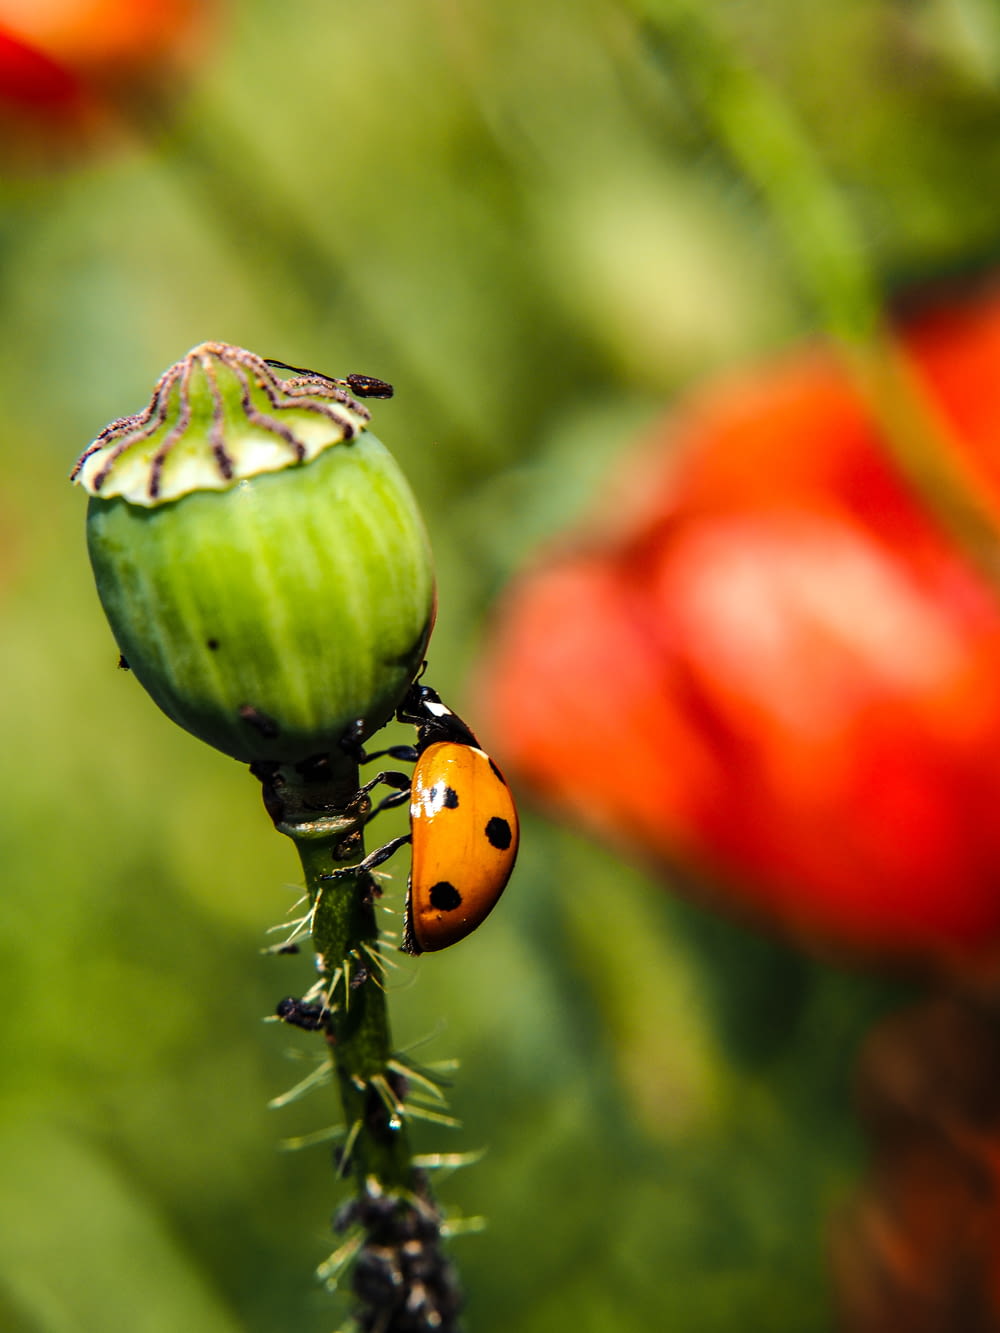 a ladybug crawling on a flower with other flowers in the background